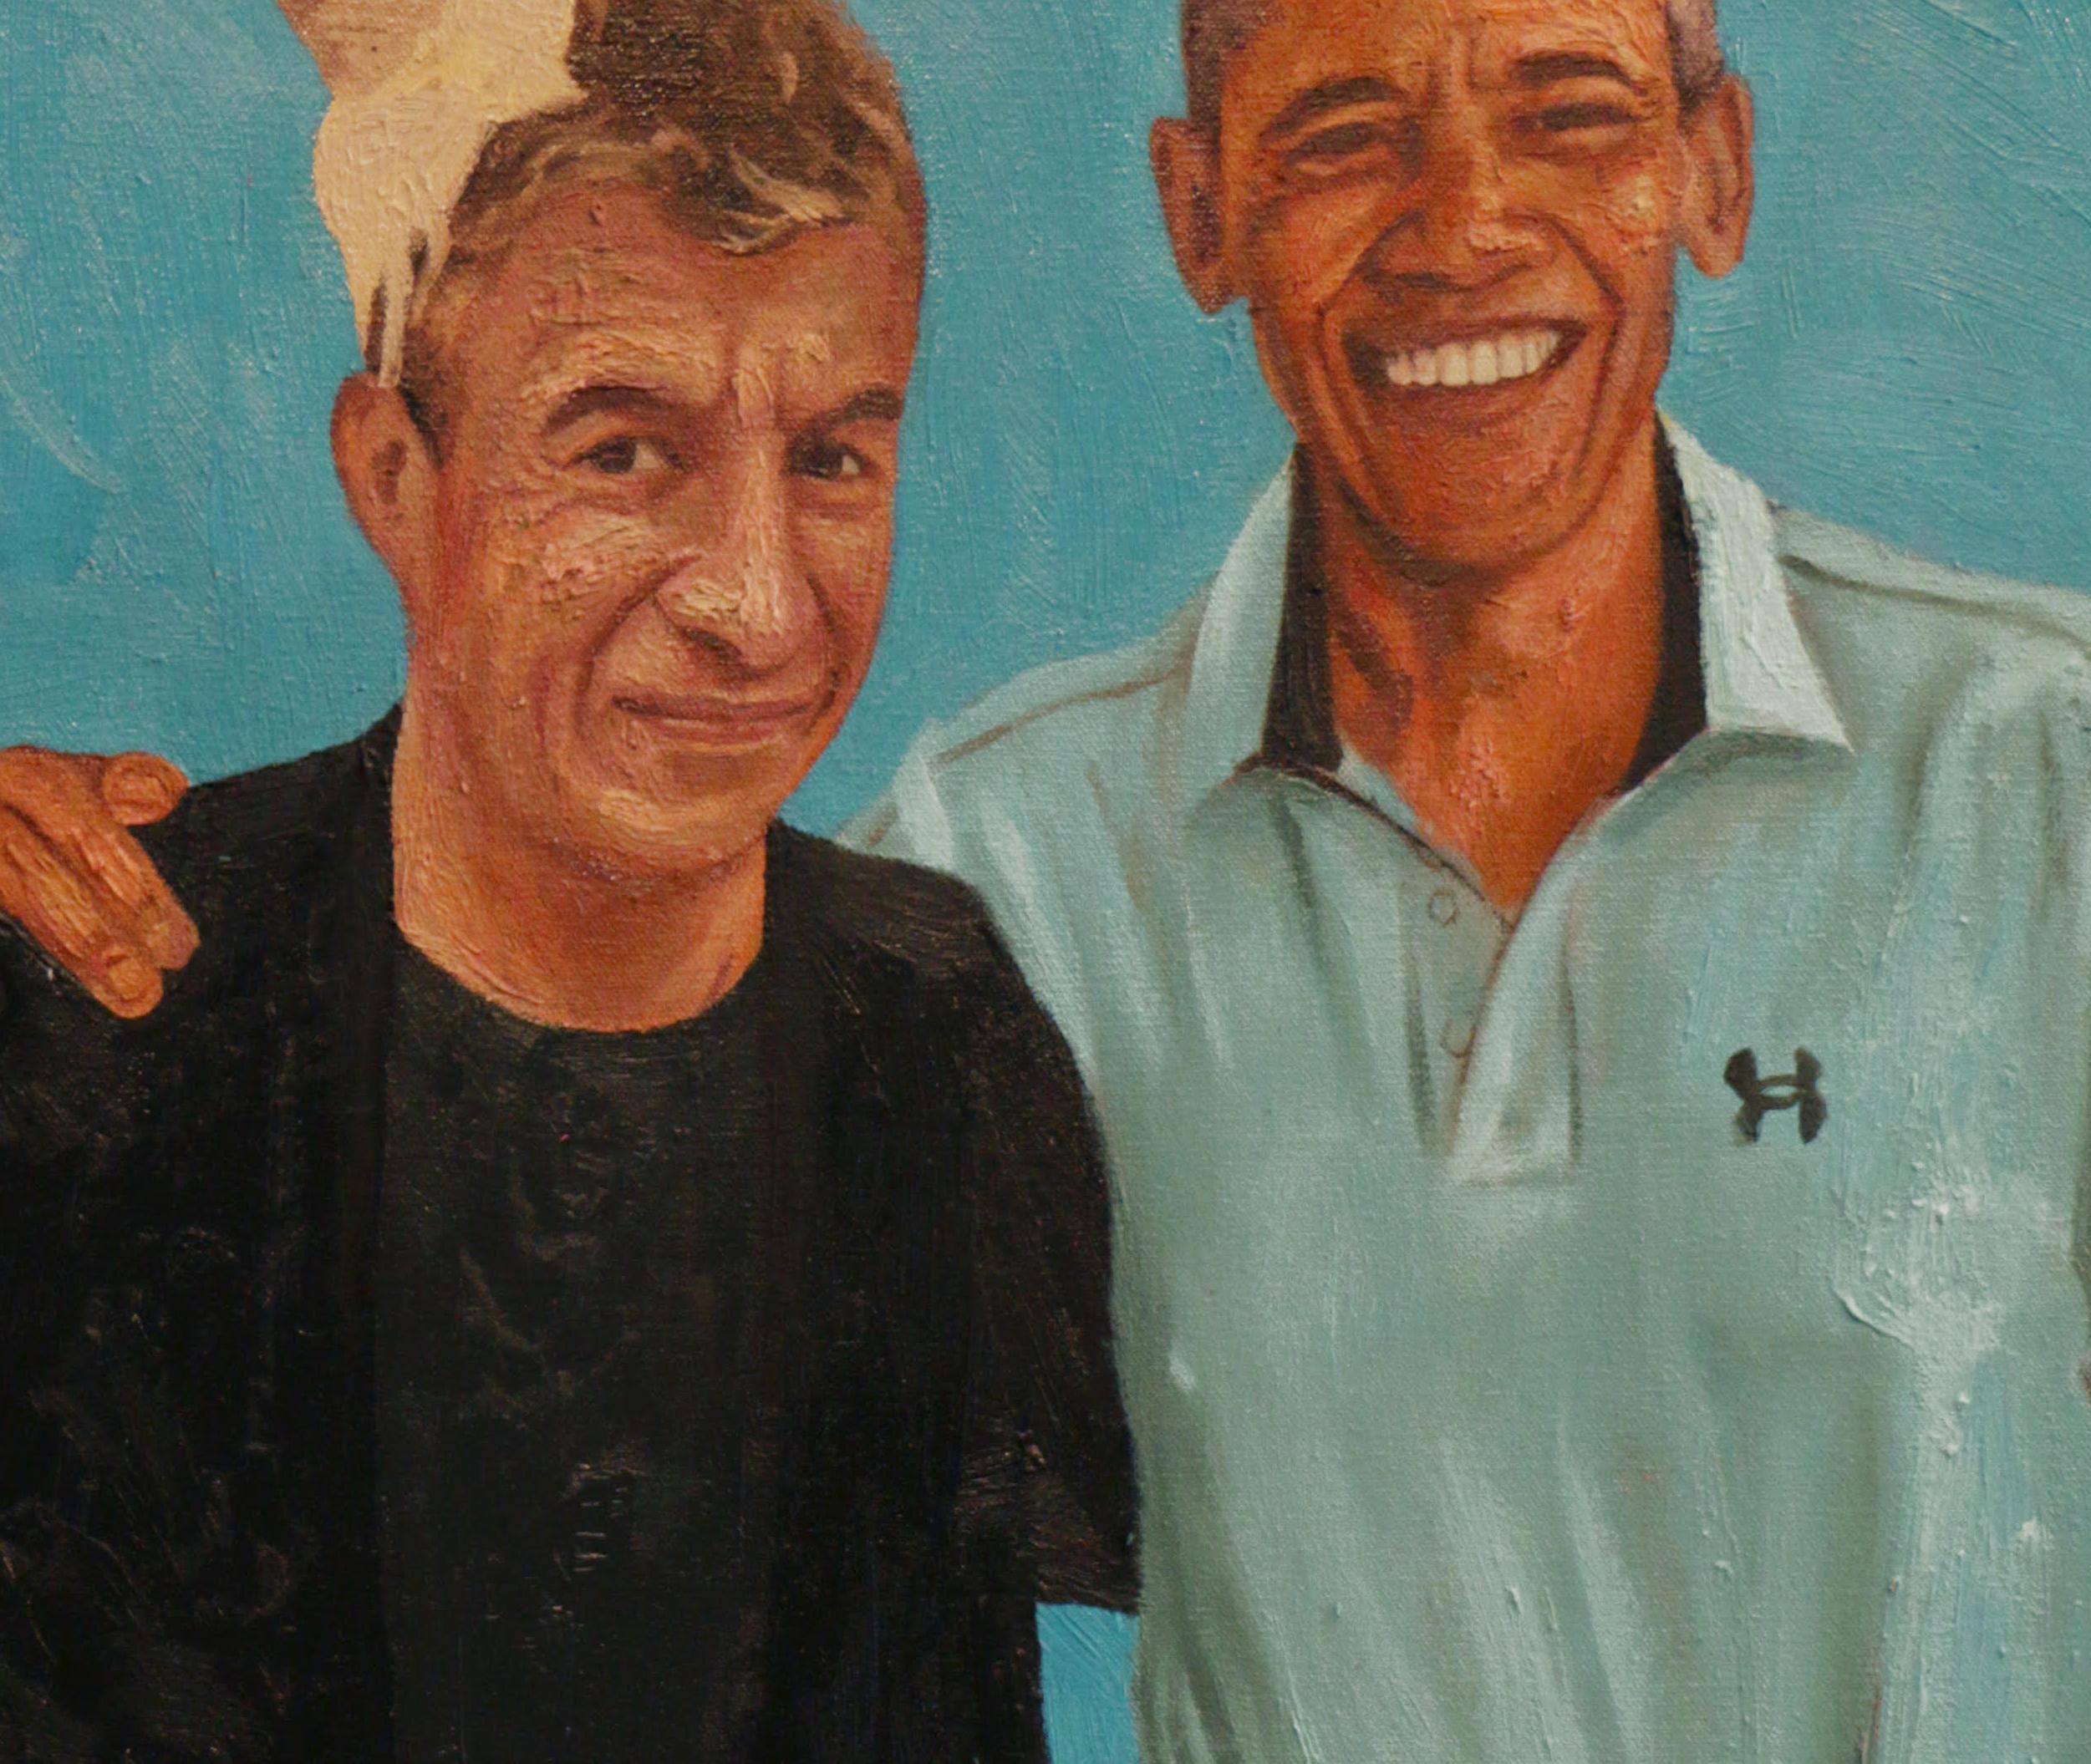 Barack Obama and a comic who has ice cream on his head, by Jose Ricardo Contreras González
From the series Movies
Oil and acrylic on canvas
50 cm. H x 40 W cm. 


José Ricardo Contreras González's work revolves around the painting. The artist, a